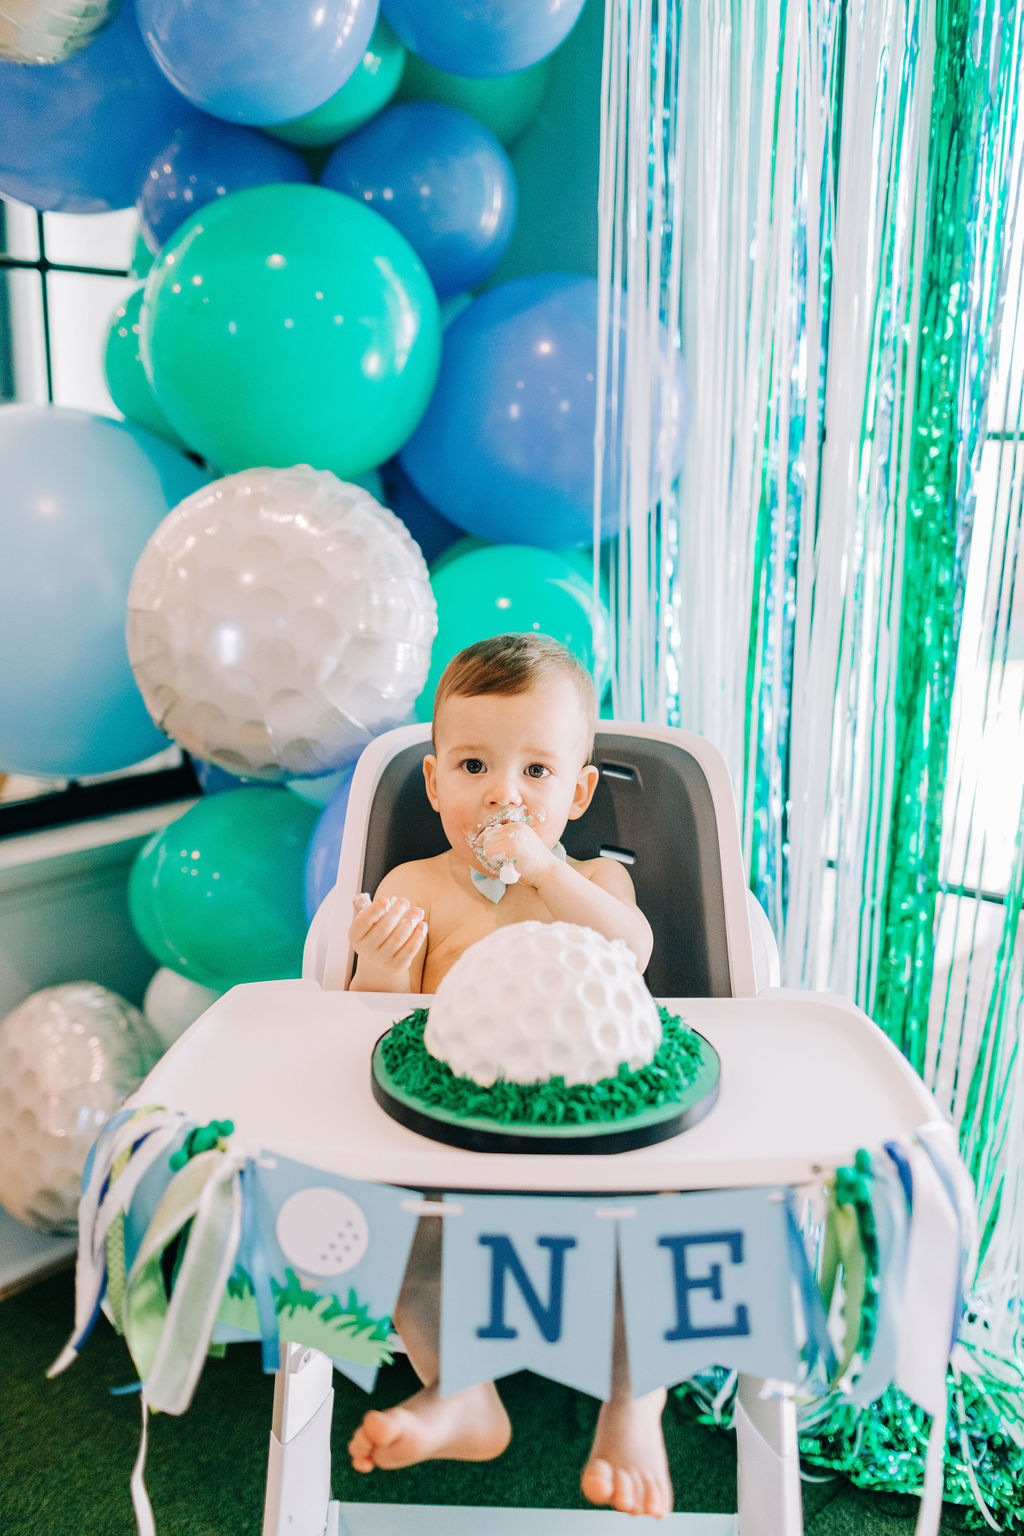 Porter's Hole-In-One First Birthday Party - Medicine & Manicures